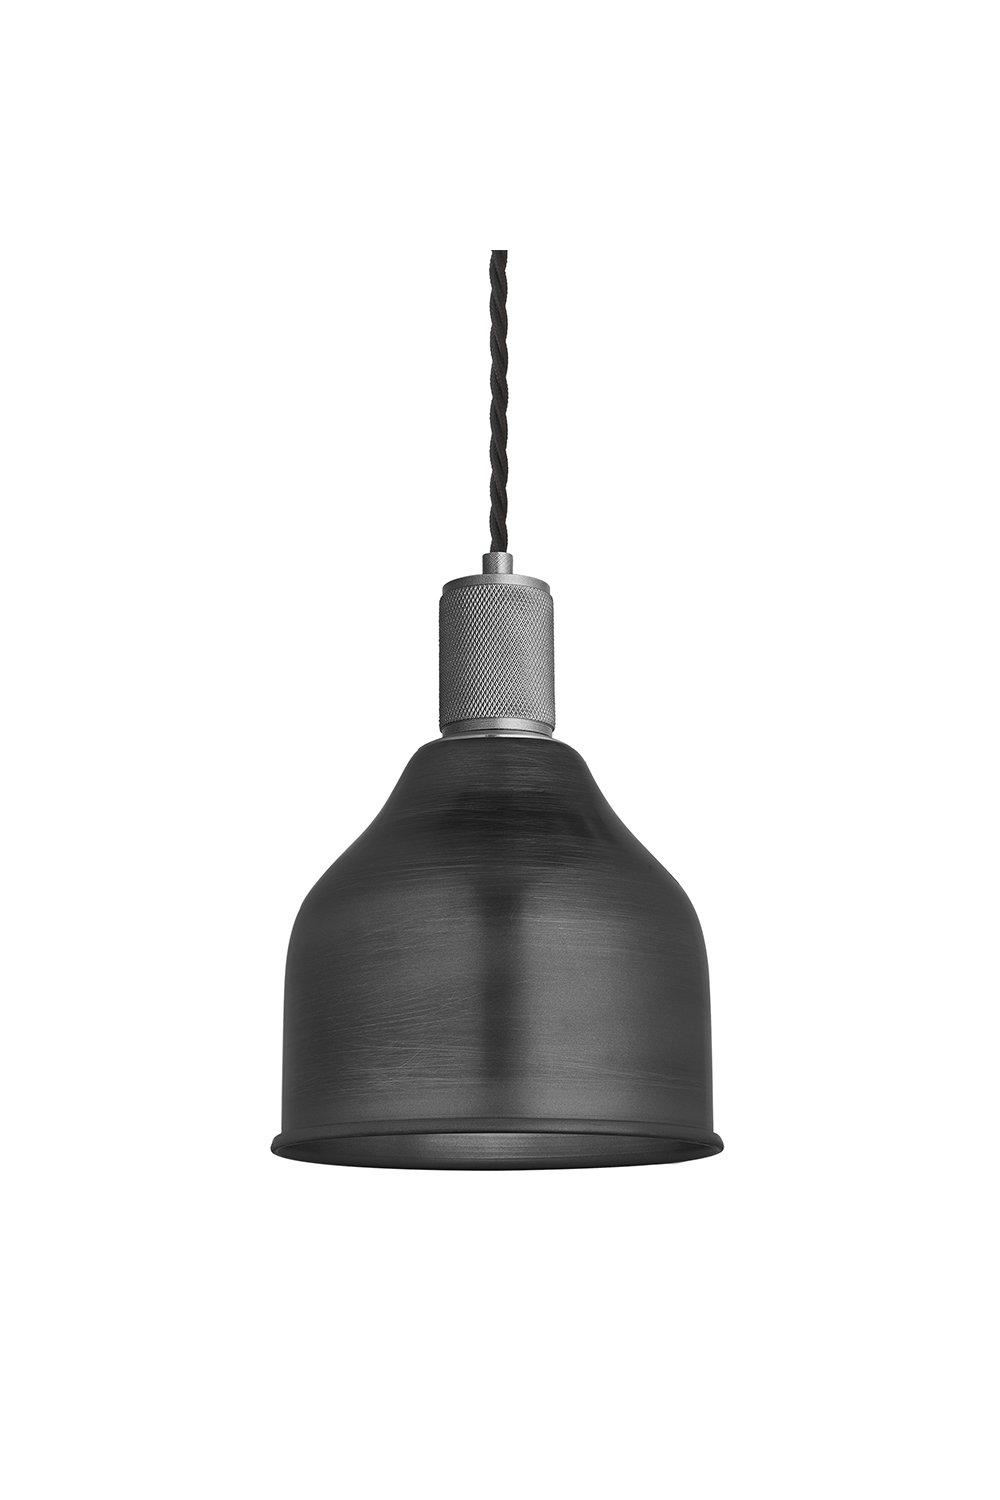 Knurled Cone Pendant Light, 7 Inch, Pewter, Pewter Holder